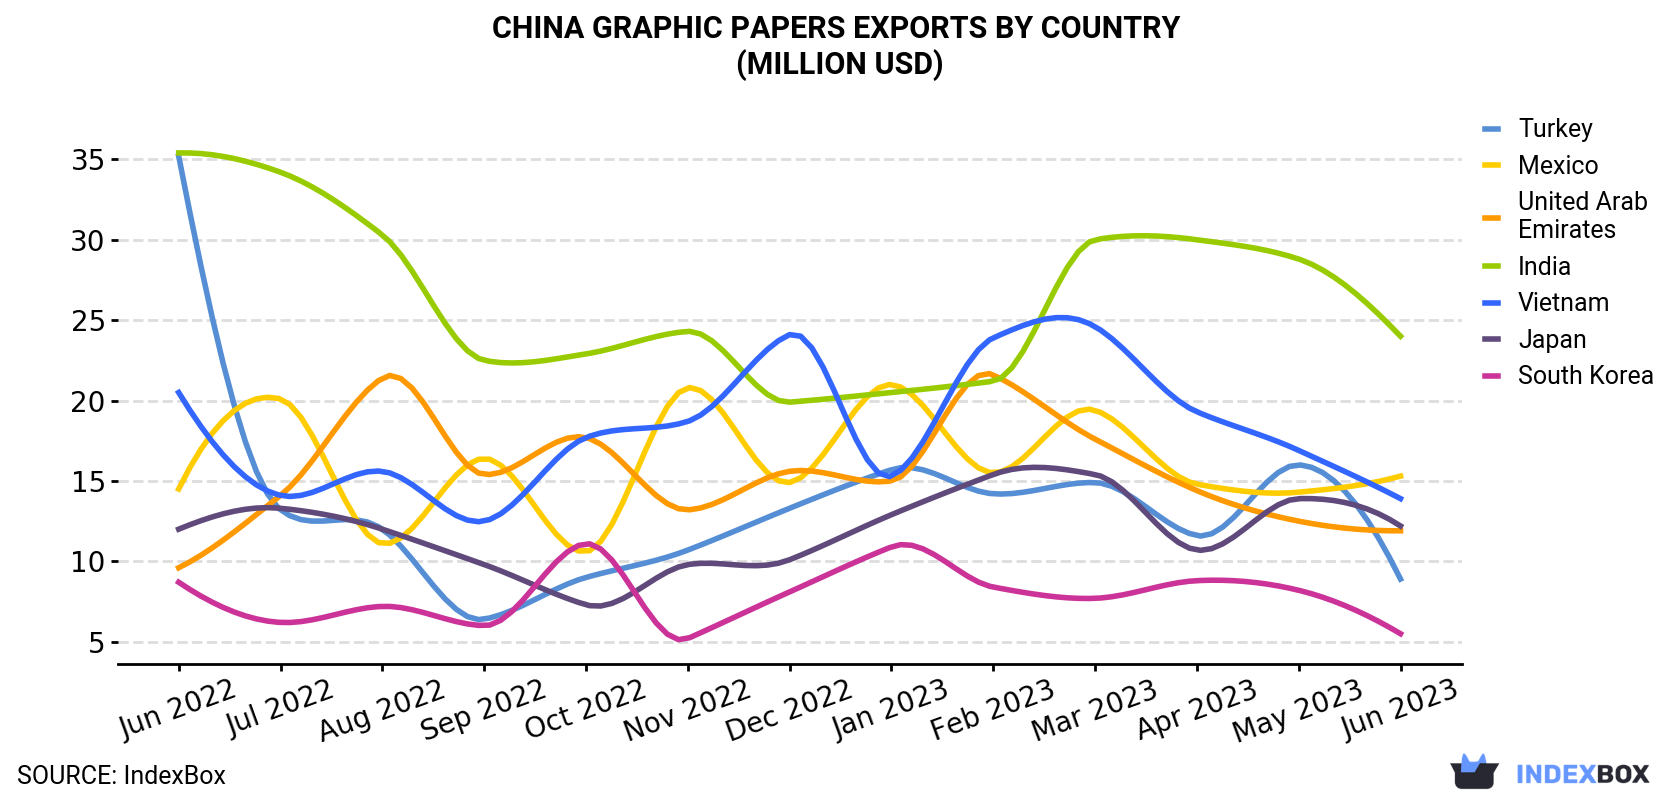 China Graphic Papers Exports By Country (Million USD)